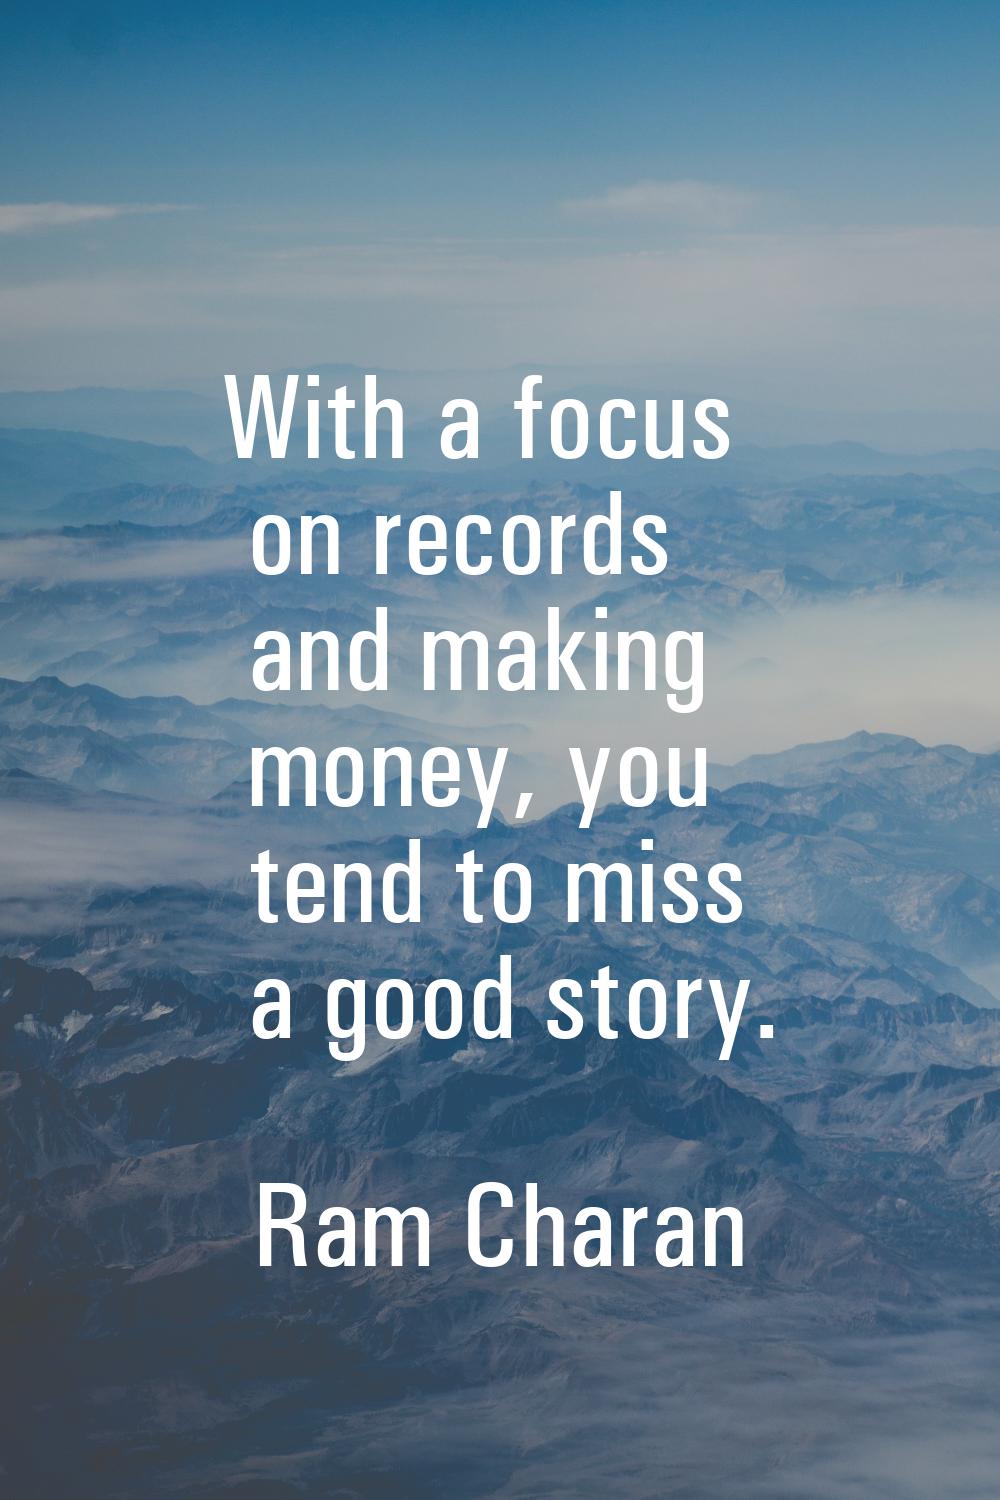 With a focus on records and making money, you tend to miss a good story.